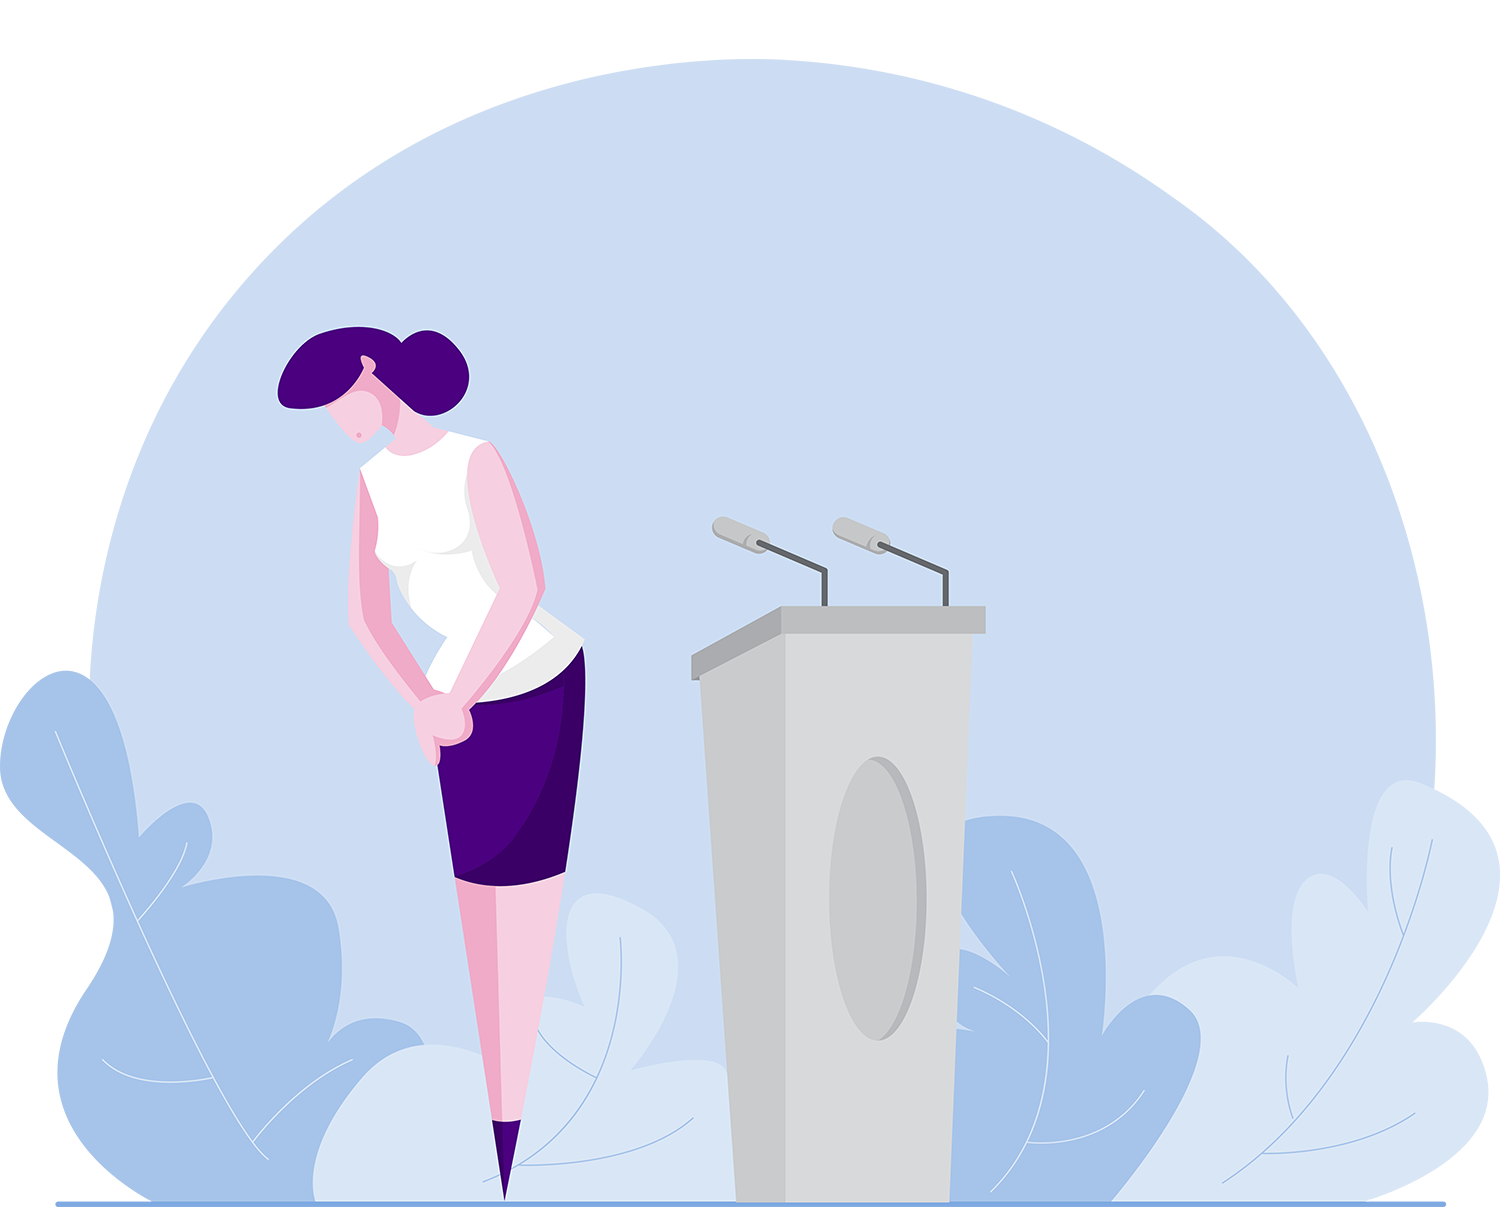 A stylized illustration of a woman shying away from a podium, too nervous to speak in public